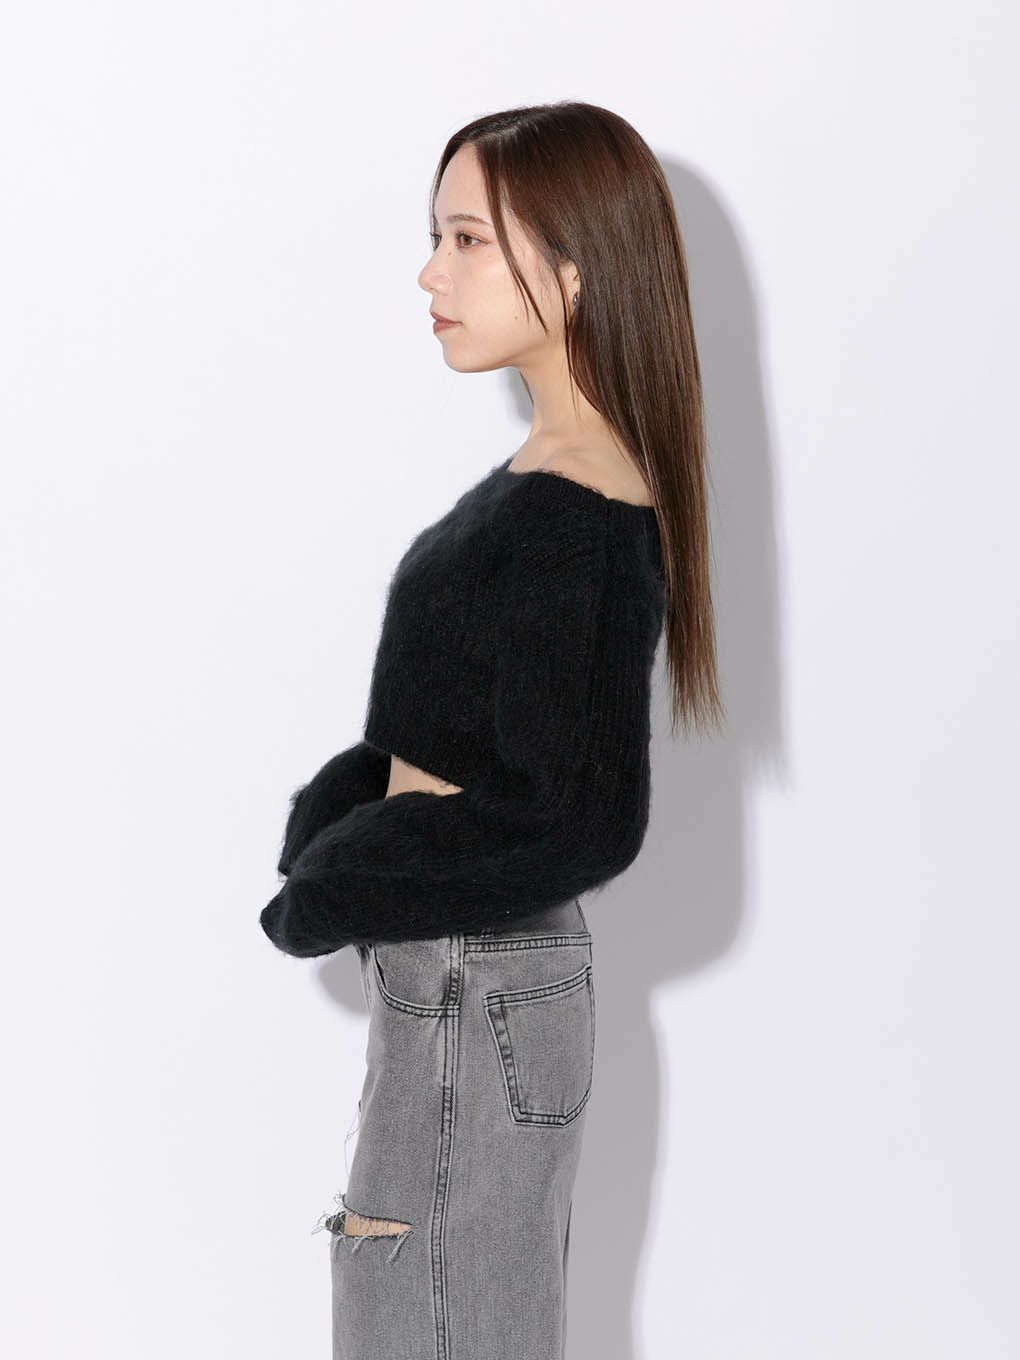 melt the lady mist cropped tops - Tシャツ/カットソー(七分/長袖)